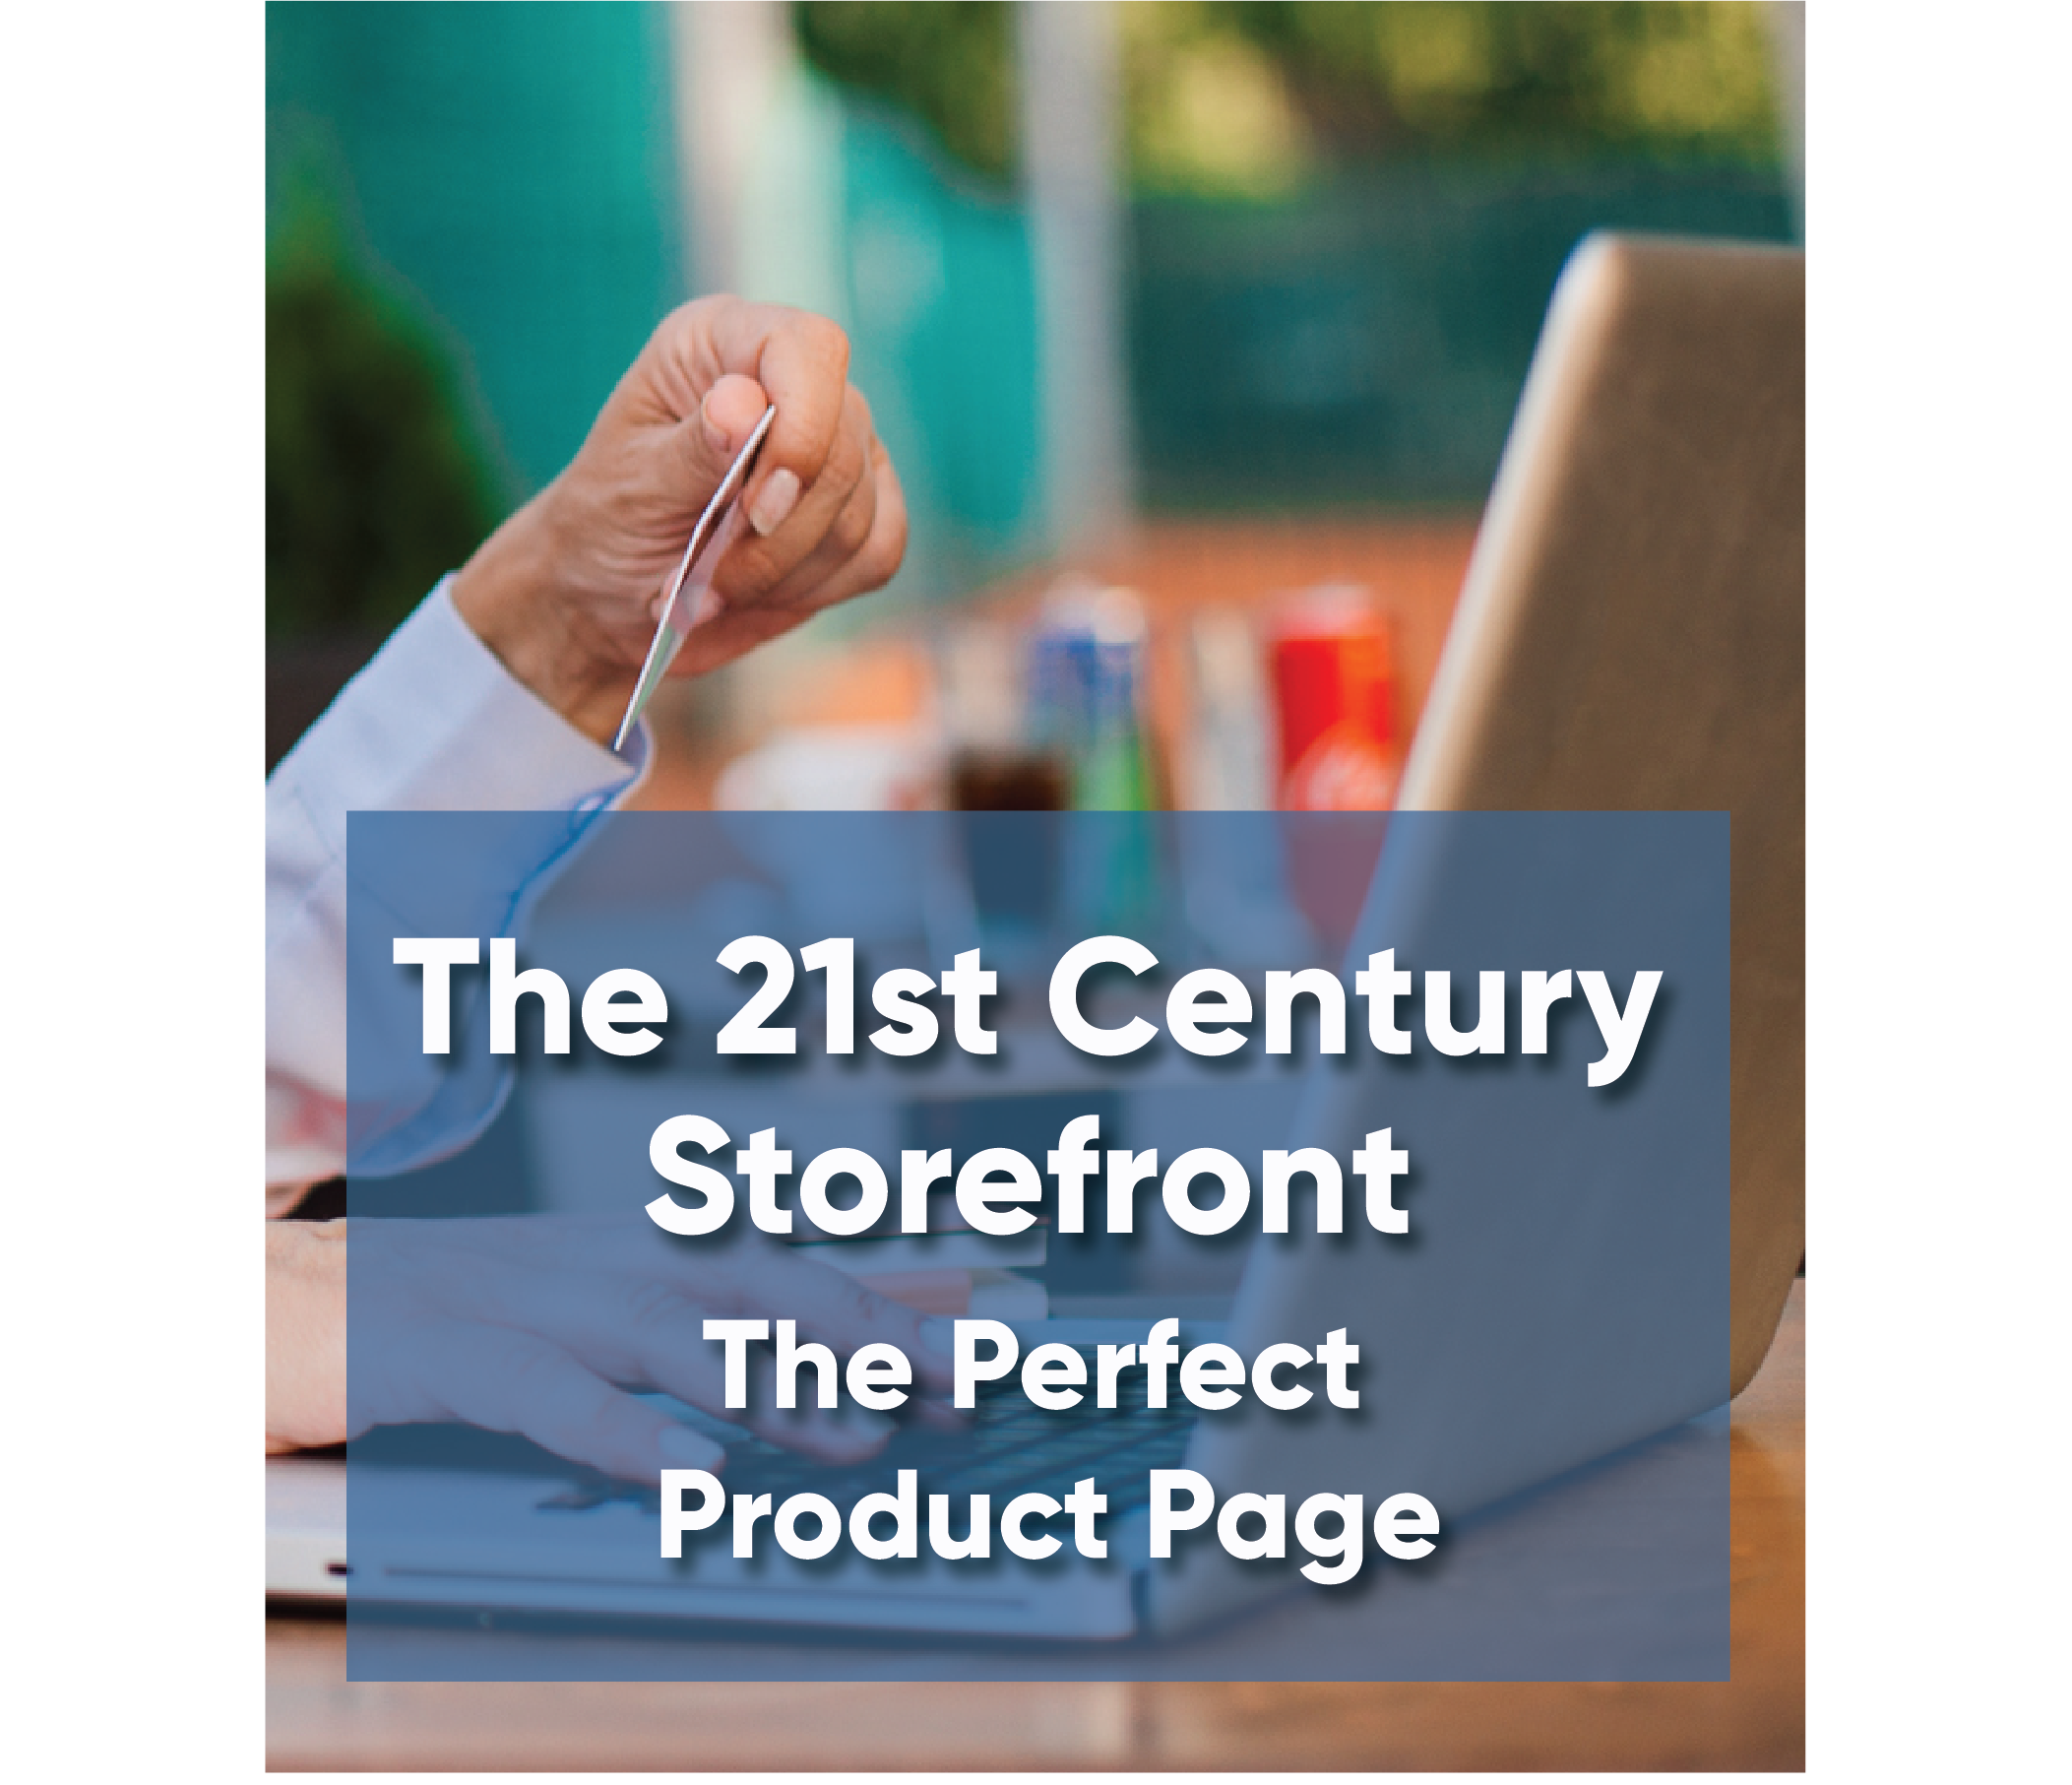 The 21st Century Storefront The Perfect Product Page